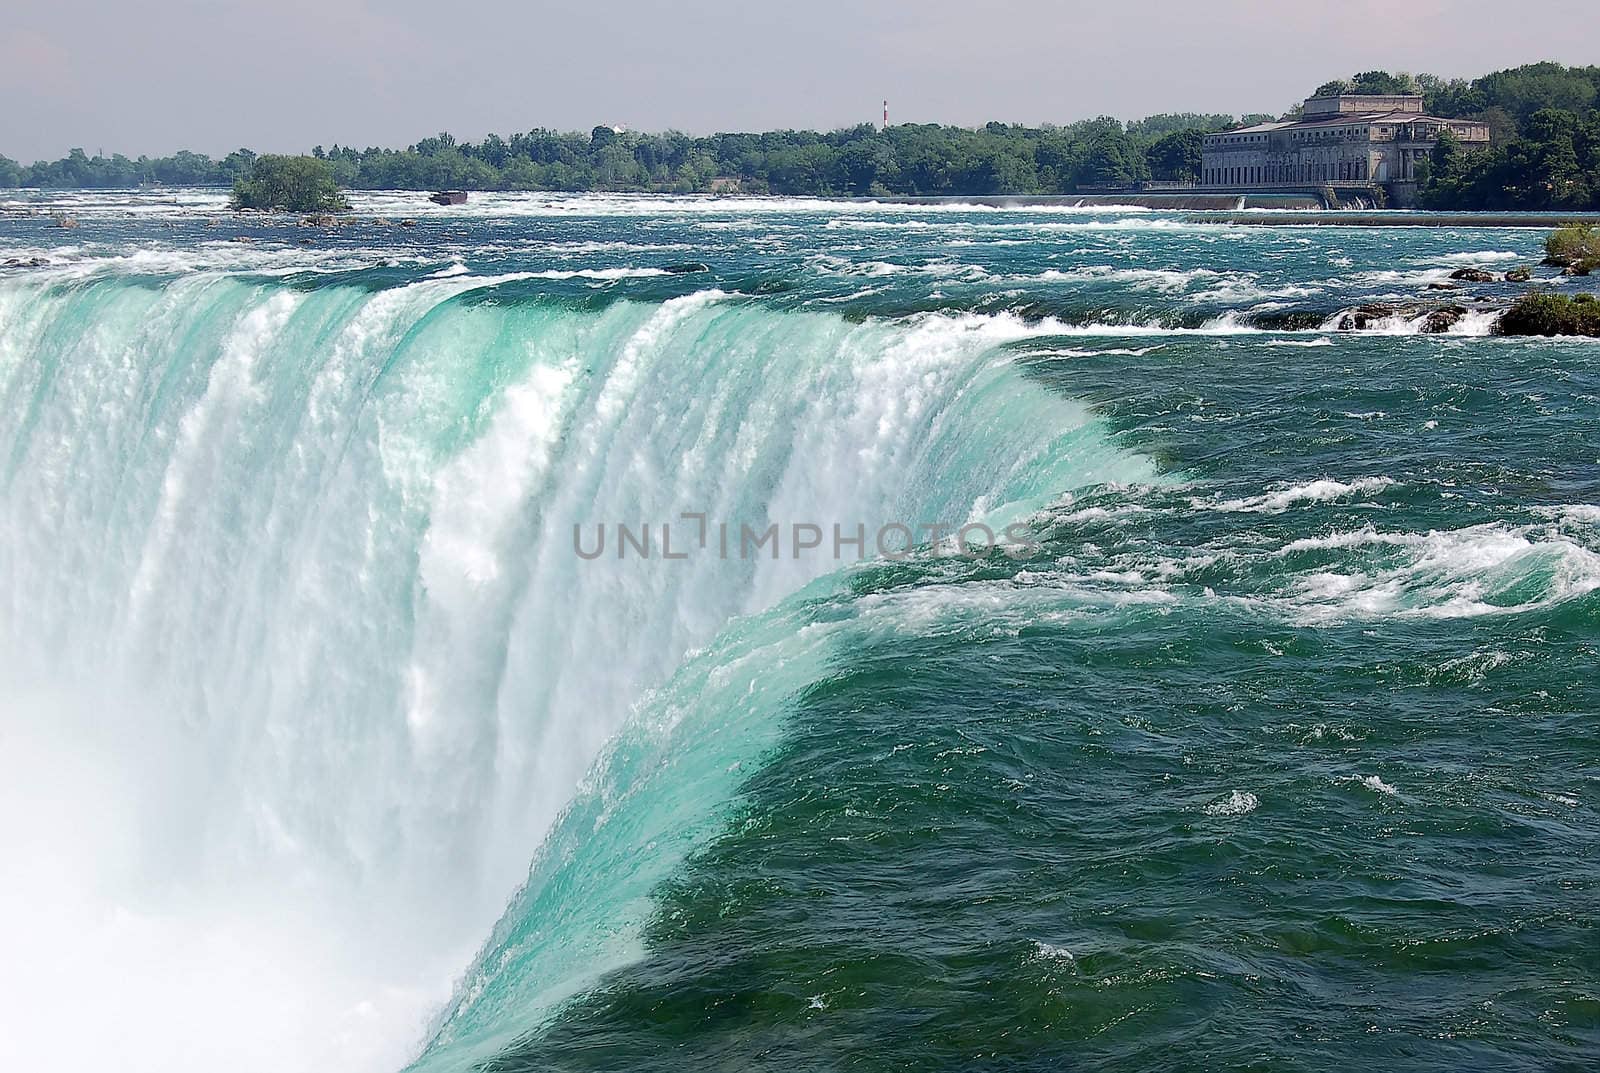 Close-up view of the Horseshoe Falls from Canada 